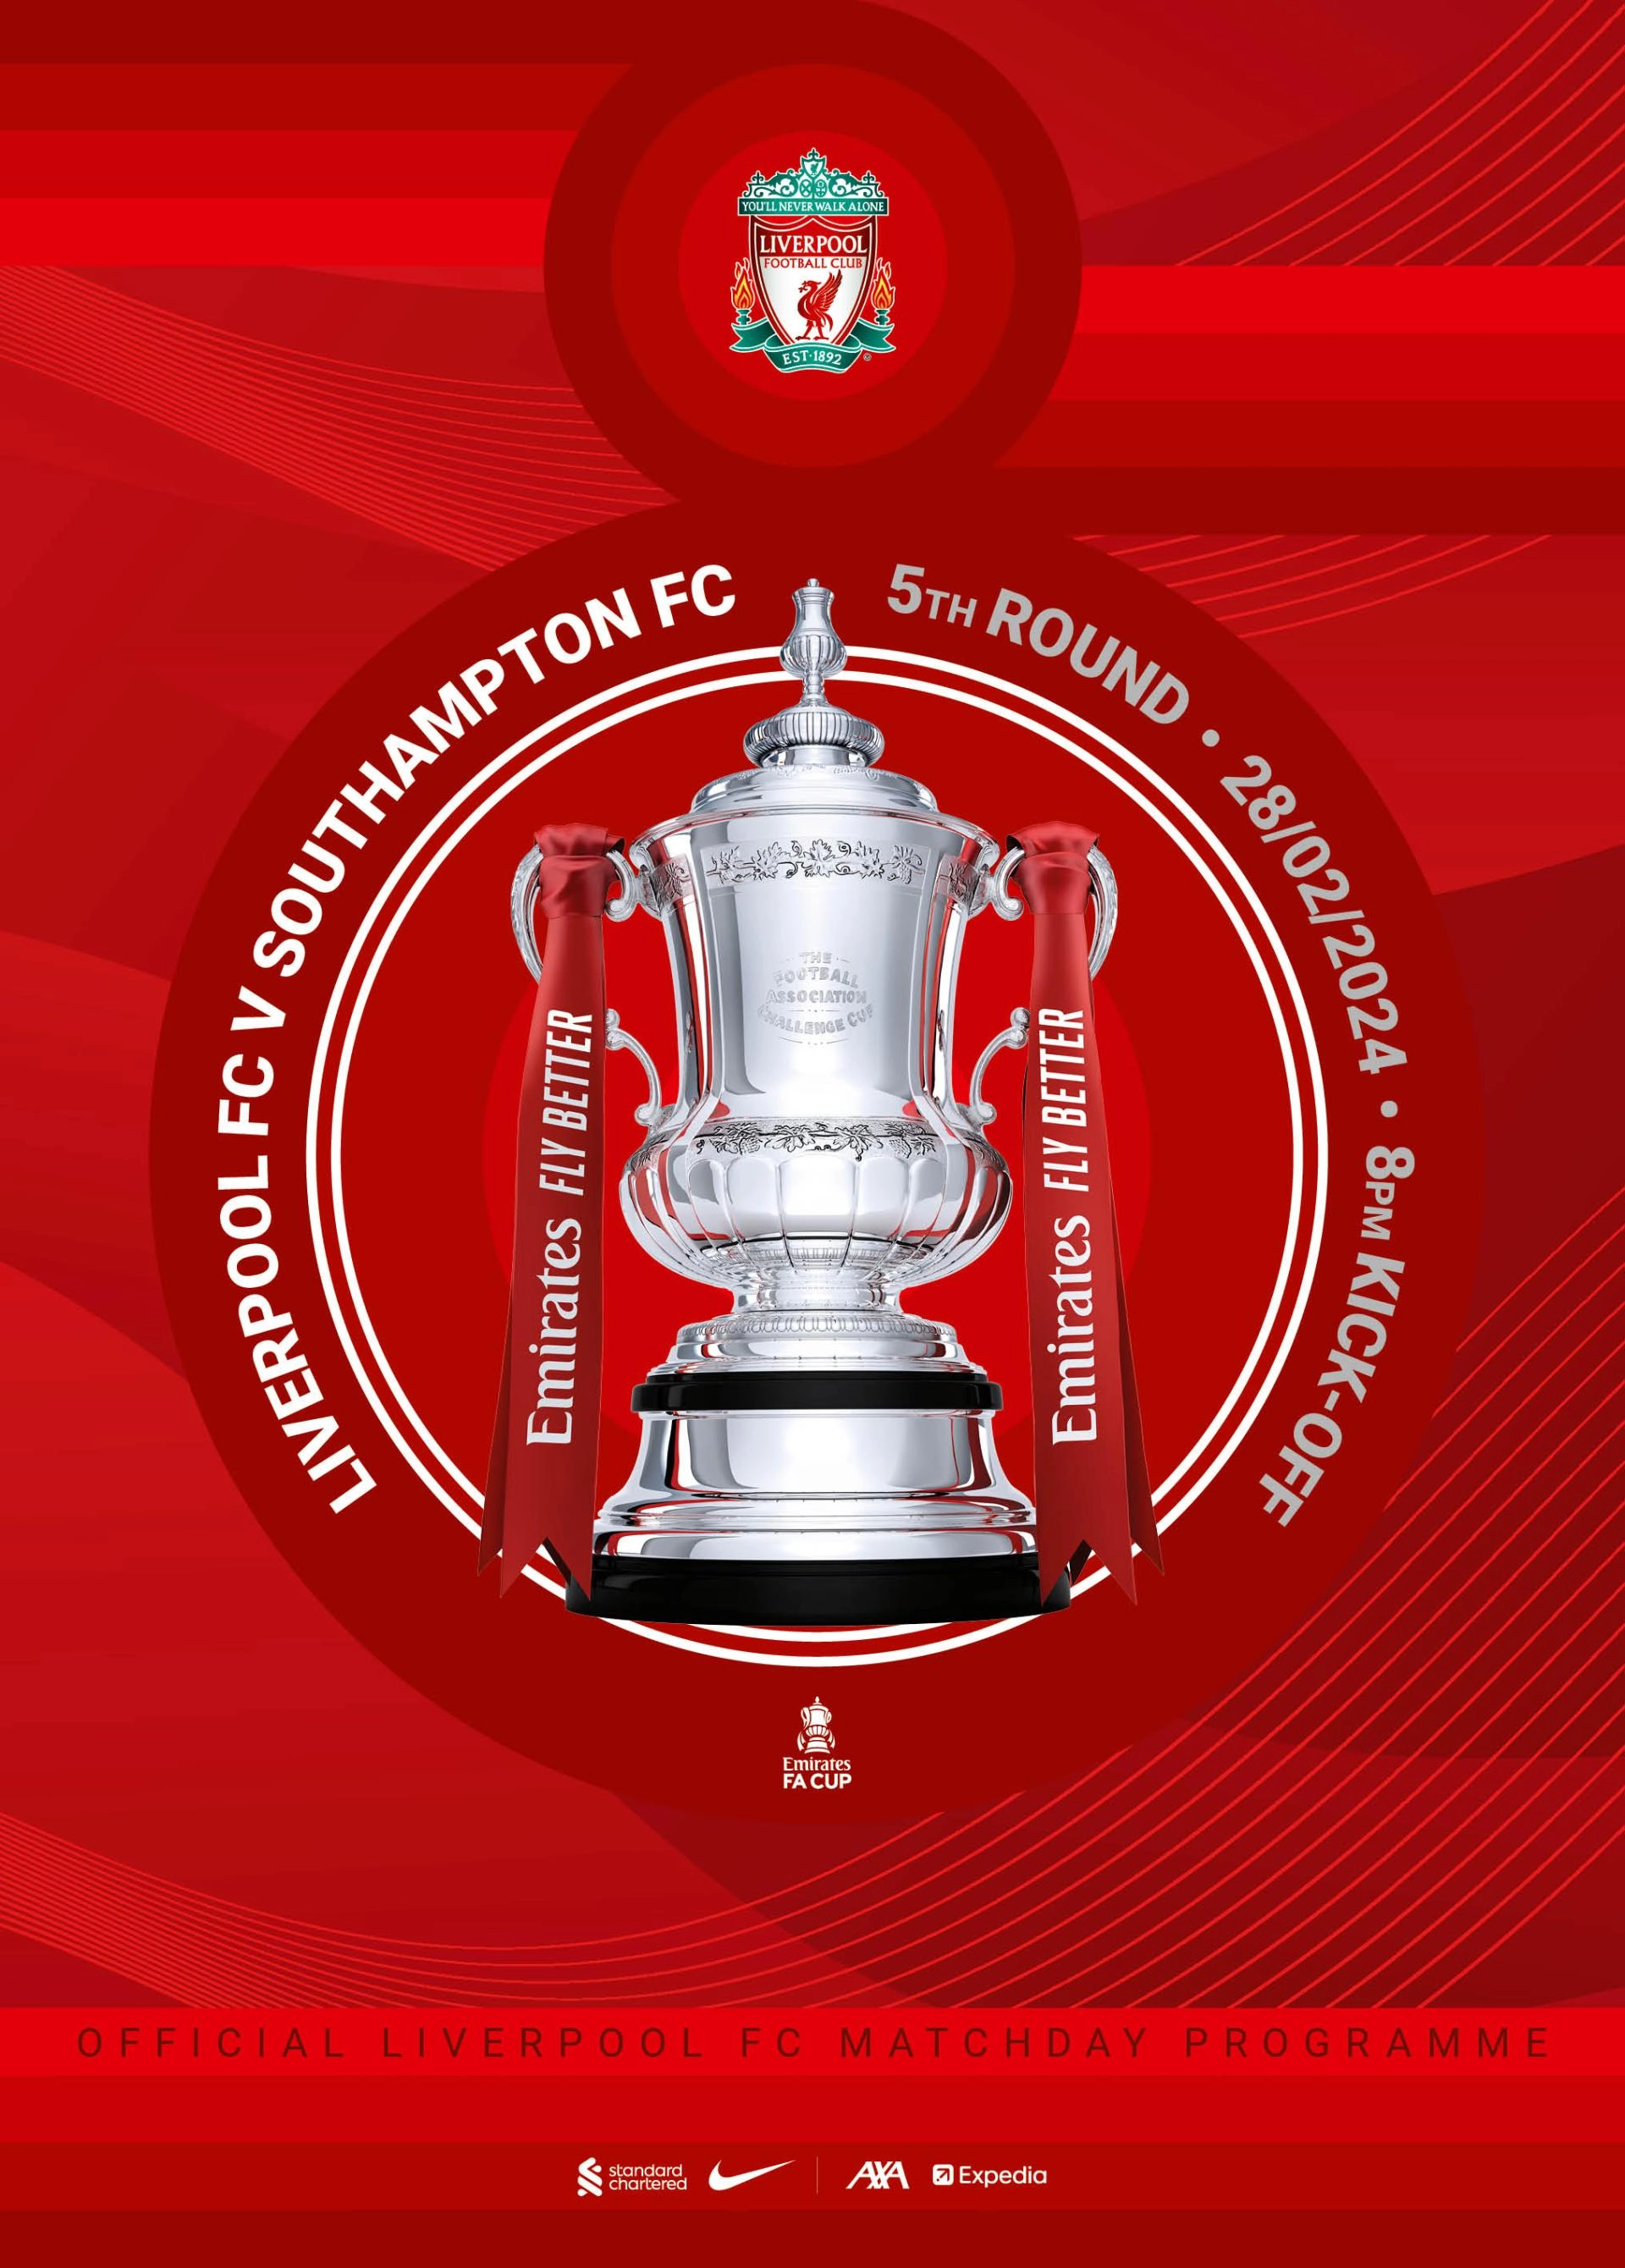 Get your Liverpool v Southampton FA Cup programme - Liverpool FC